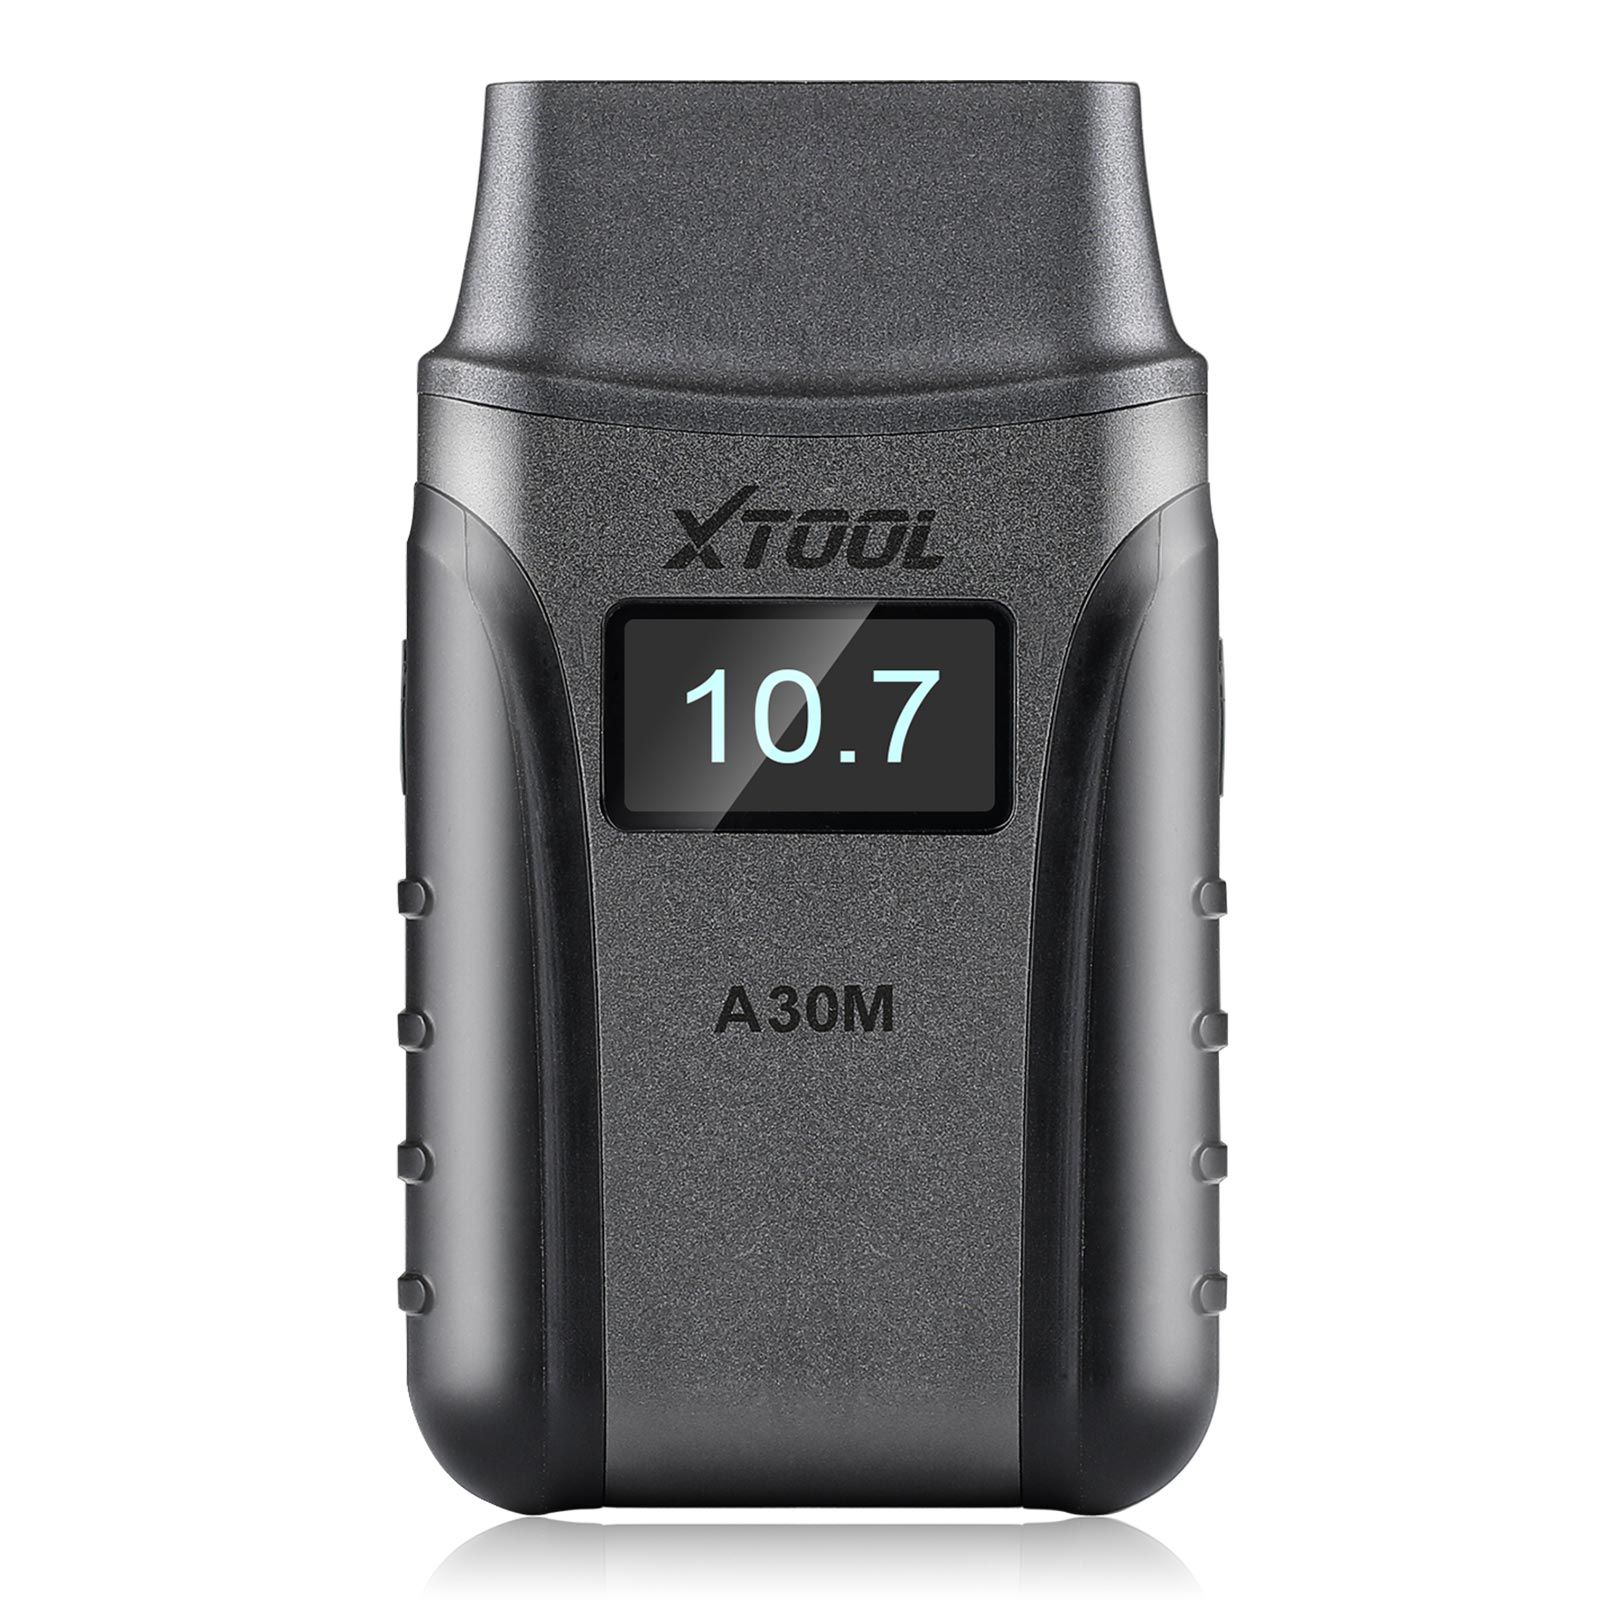 XTOOL A30M OBD2 Full System Diagnostic Tool Bi-directional Control Scanner For Andriod/IOS Car Code Reader